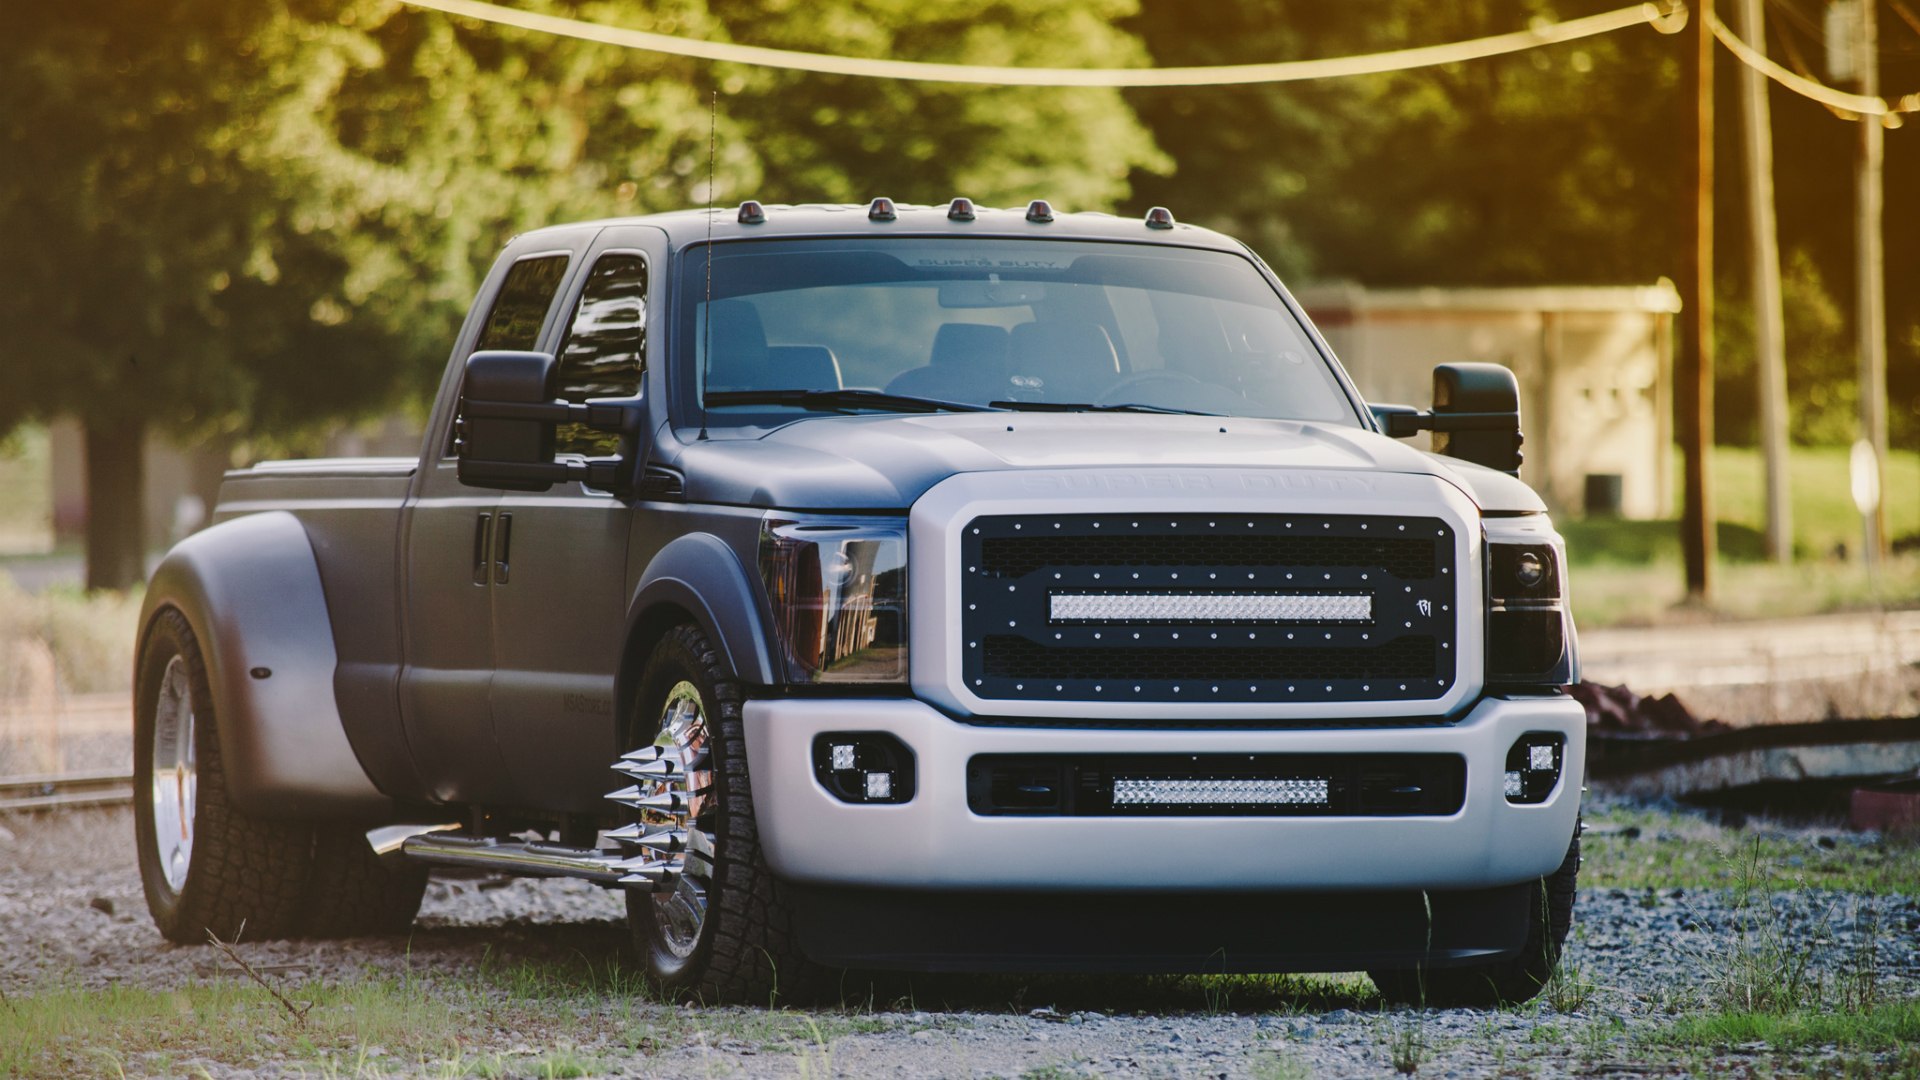 Powerful Car Ford F Wallpaper And Image